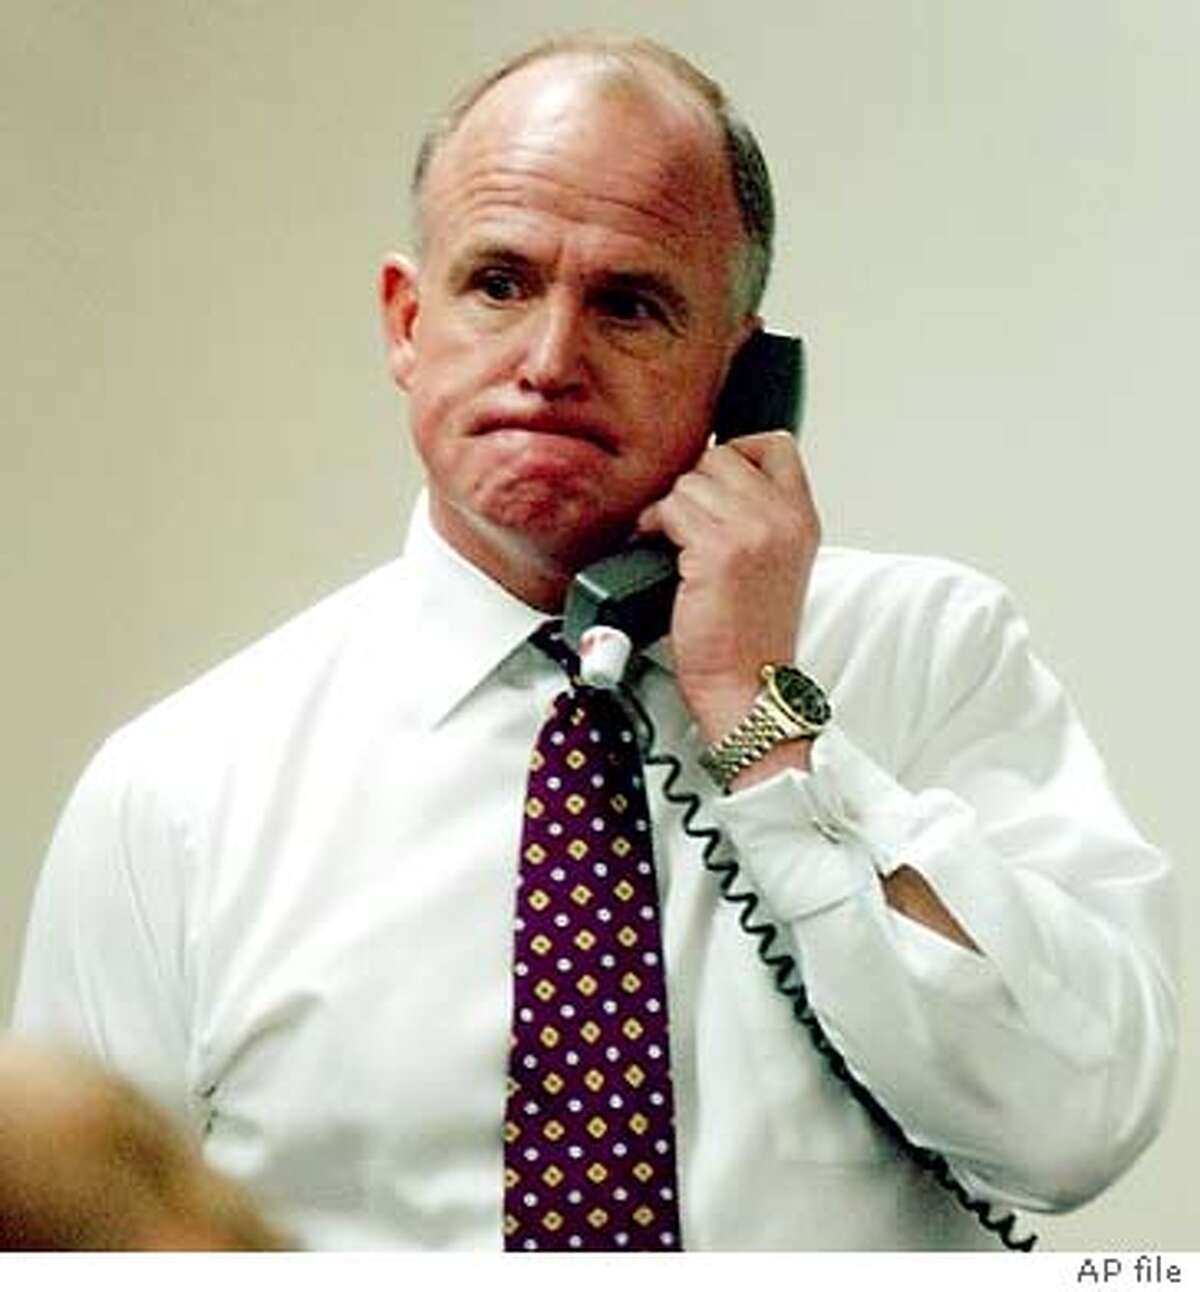 ** FILE ** Former San Francisco Police Department Police Chief Alex Fagan Sr. is seen on the phone inside the Hall of Justice in San Francisco, in this Monday, March 3, 2003, file photo. Fagan Sr. retired as the city's emergency services director Tuesday, March 30, 2004, as new details surfaced about his actions at an Arizona hotel where he and his son got into a drunken fight that resulted in the younger man's arrest. San Francisco Mayor Gavin Newsom's office announced in a brief statement that Fagan,53, would be leaving his $195,290 a year job "due to personal and family matters and in the best interest of the city." Still considered a member of the police department, he has been placed on administrative leave until his retirement becomes effective. (AP Photo/Marcio Jose Sanchez)